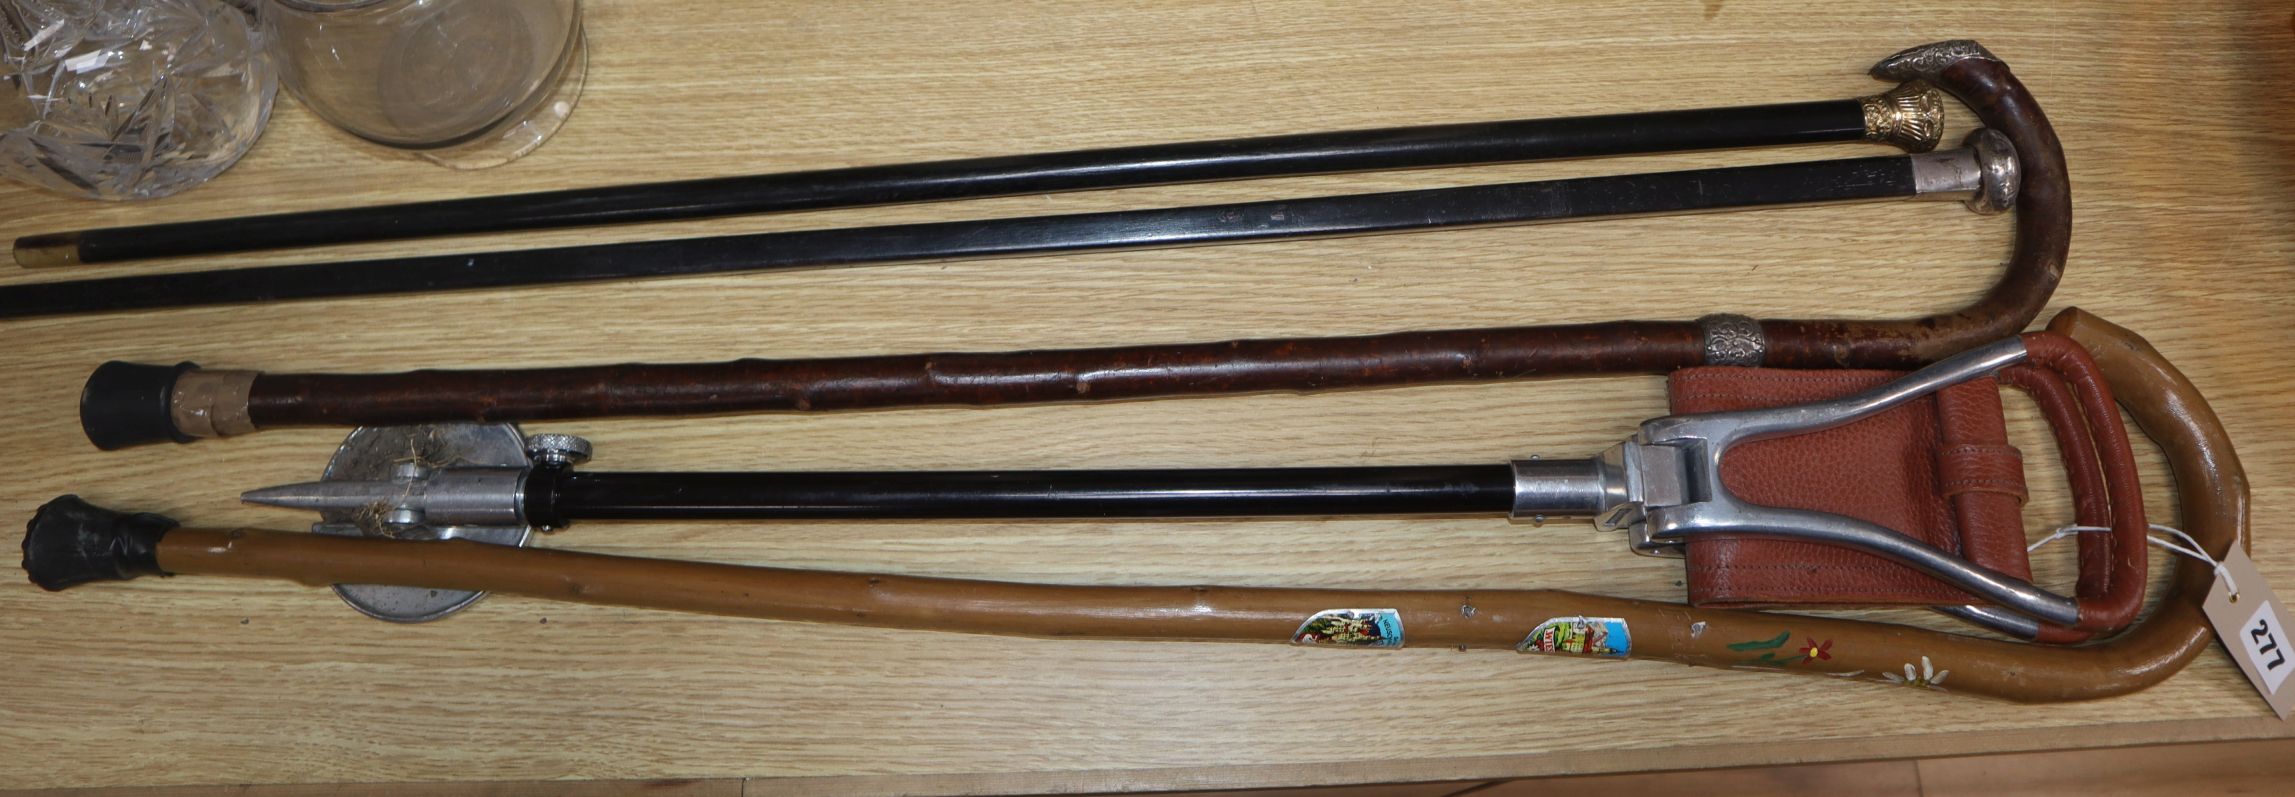 Four walking sticks and a shooting stick